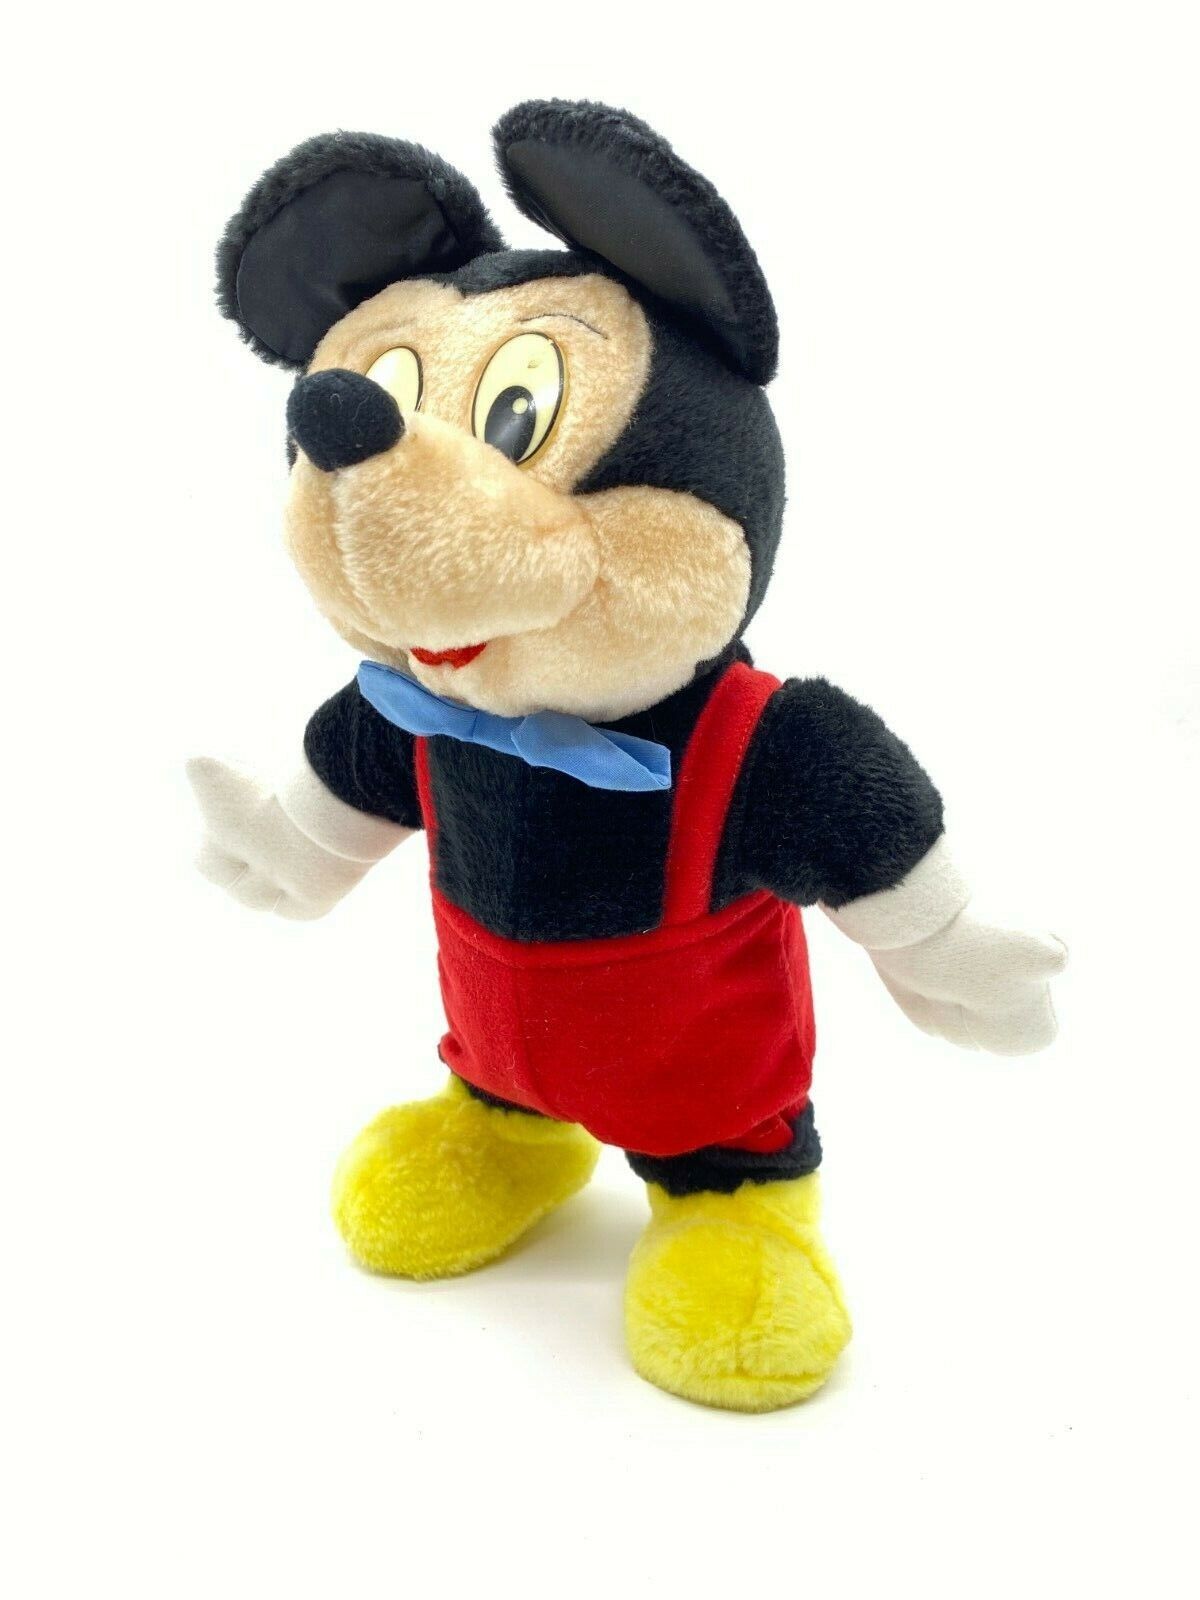 DISNEY Mickey Mouse Dancing Little Boppers Worlds of Wonder Vintage 1987 Plush